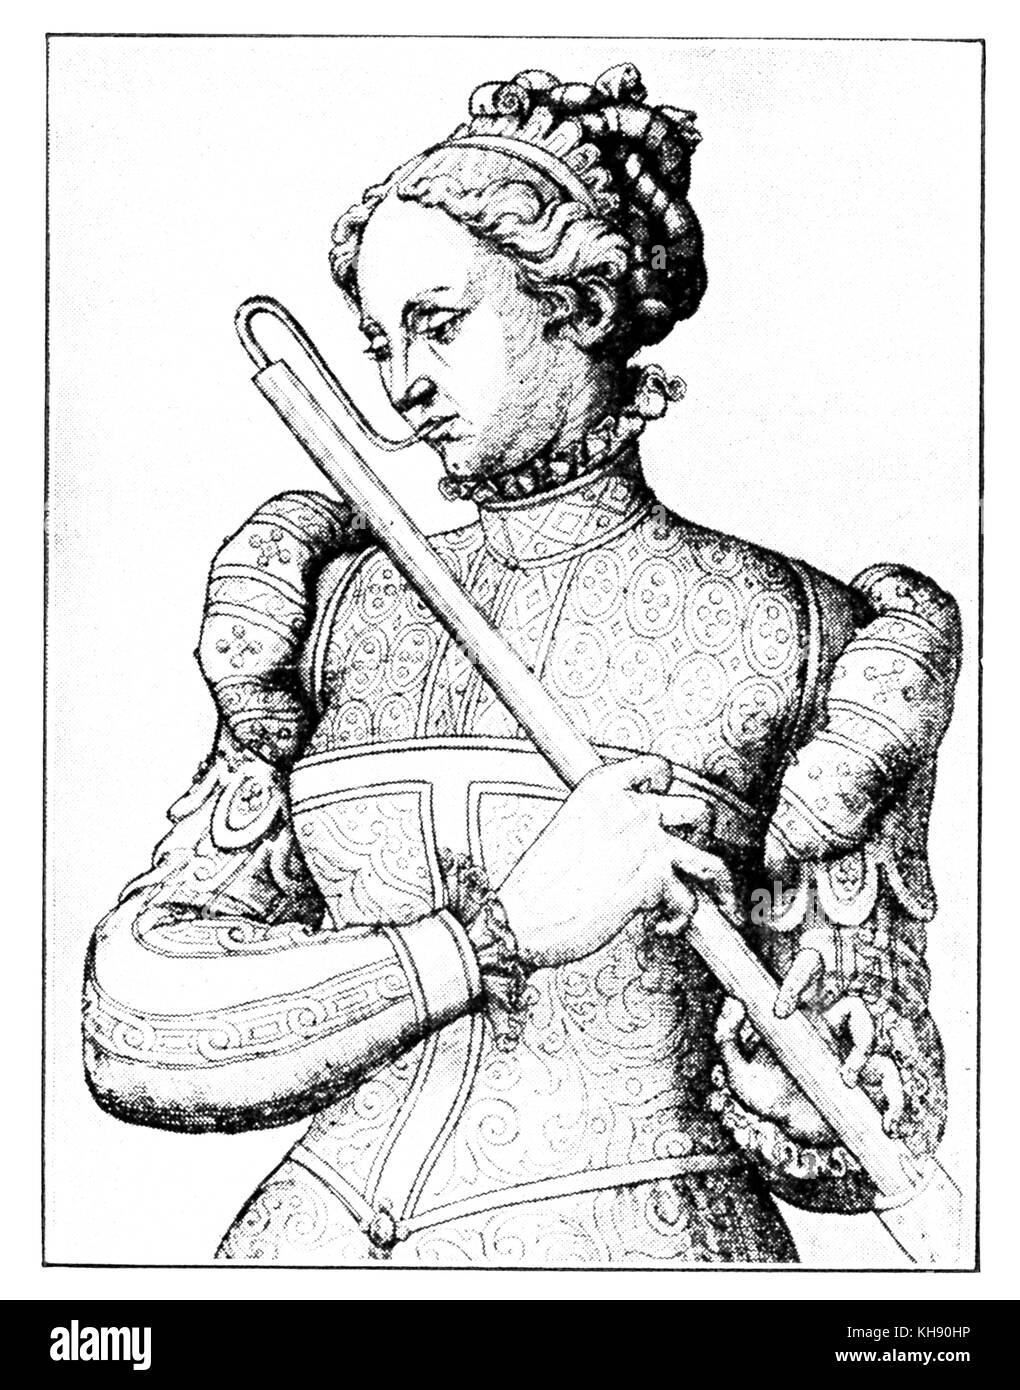 'The Consert' -   Lady playing the bass flute. unsigned series of French woodcuts, c. 1570. Stock Photo